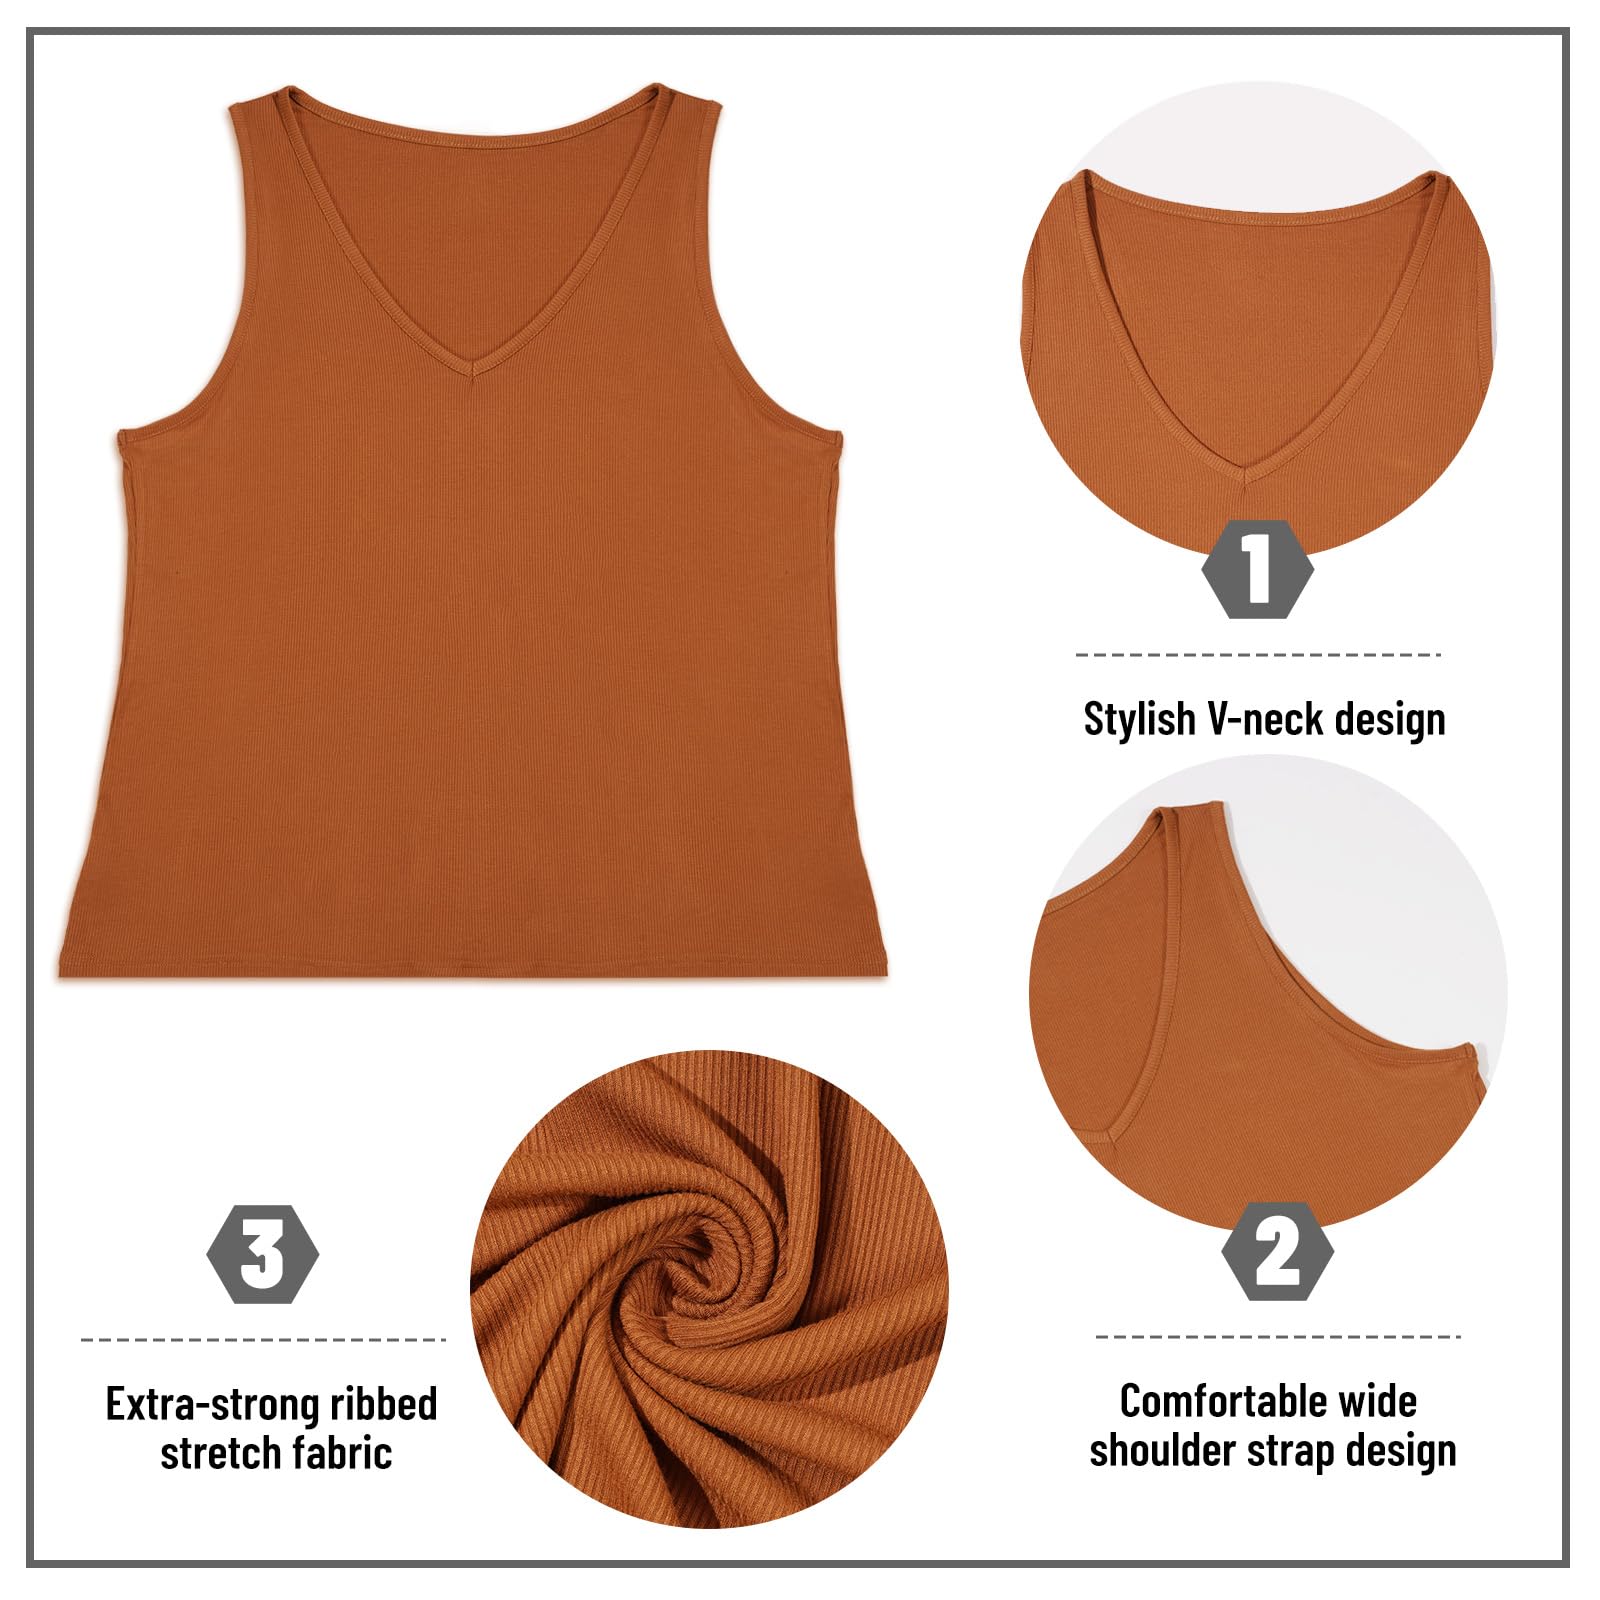 Plus Size Tank Tops for Women V Neck Knit Top-Caramel - Moon Wood